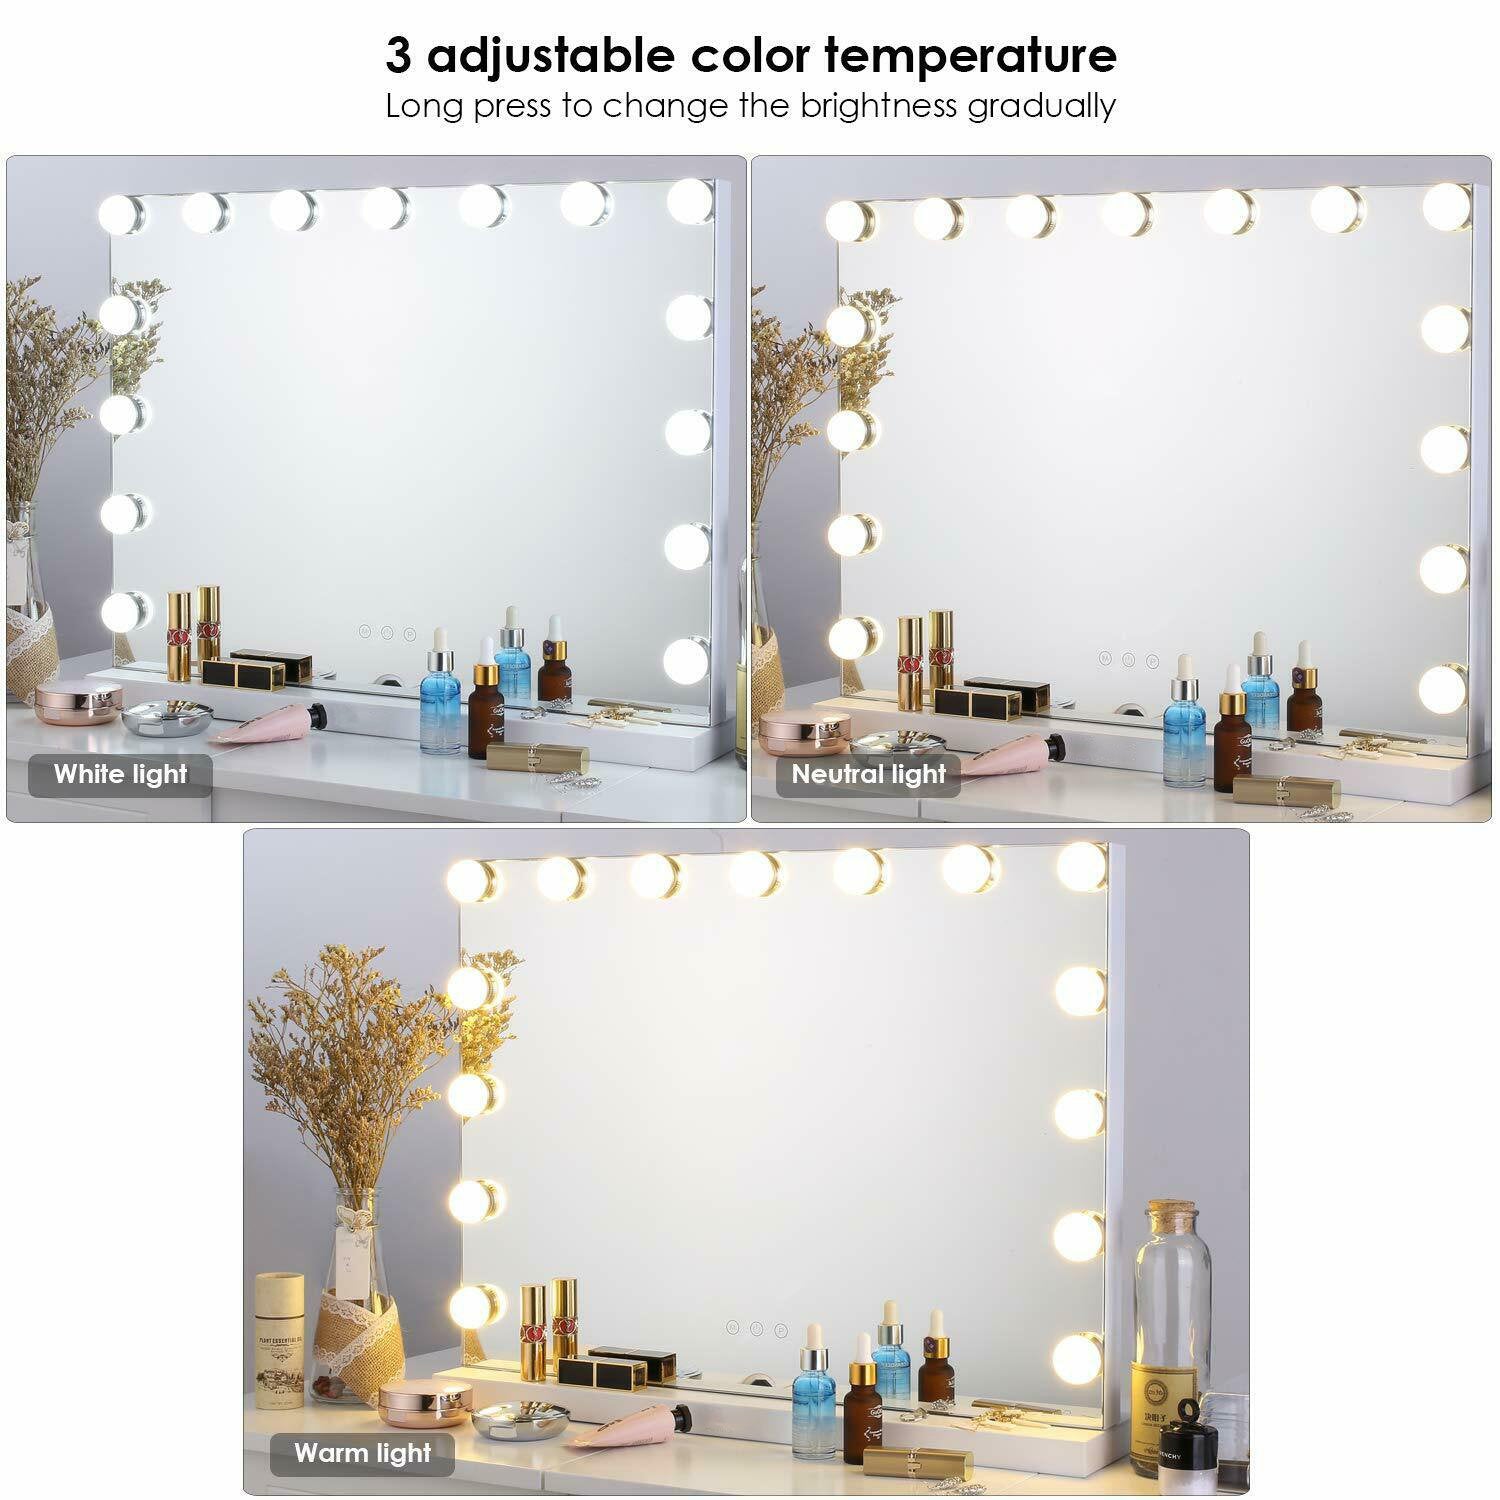 3 adjustable color temperature on image of mirror lights